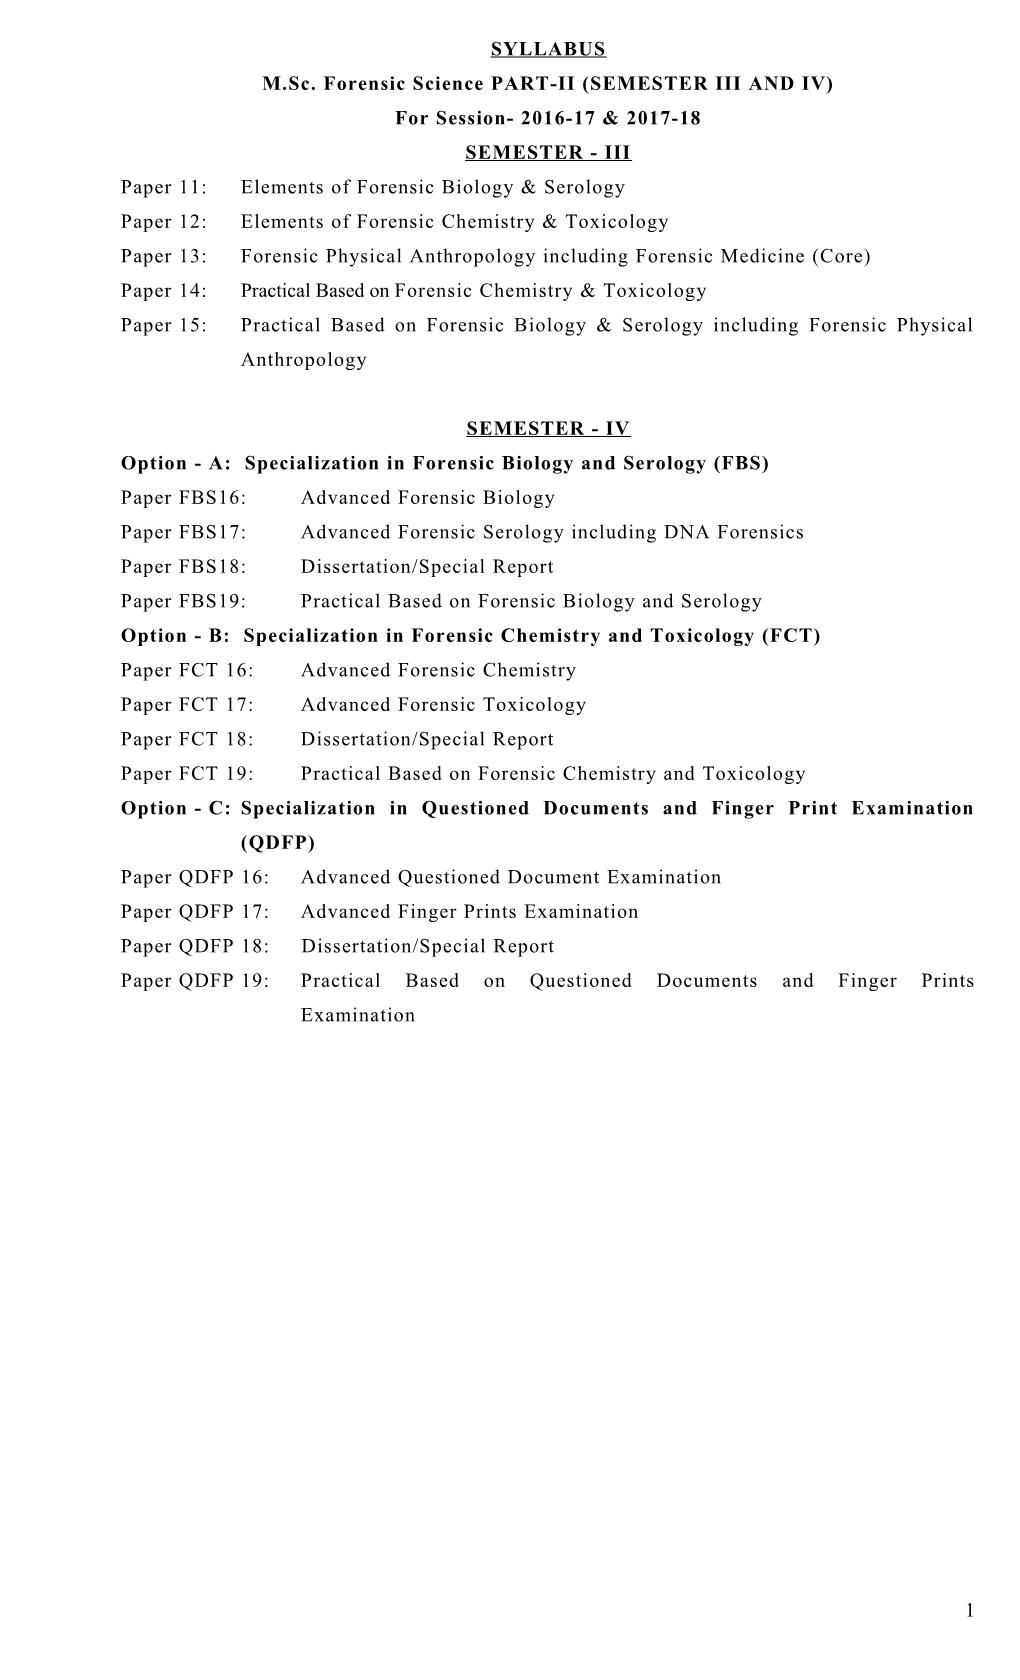 M.Sc. Forensic Science PART-II (SEMESTER III and IV)